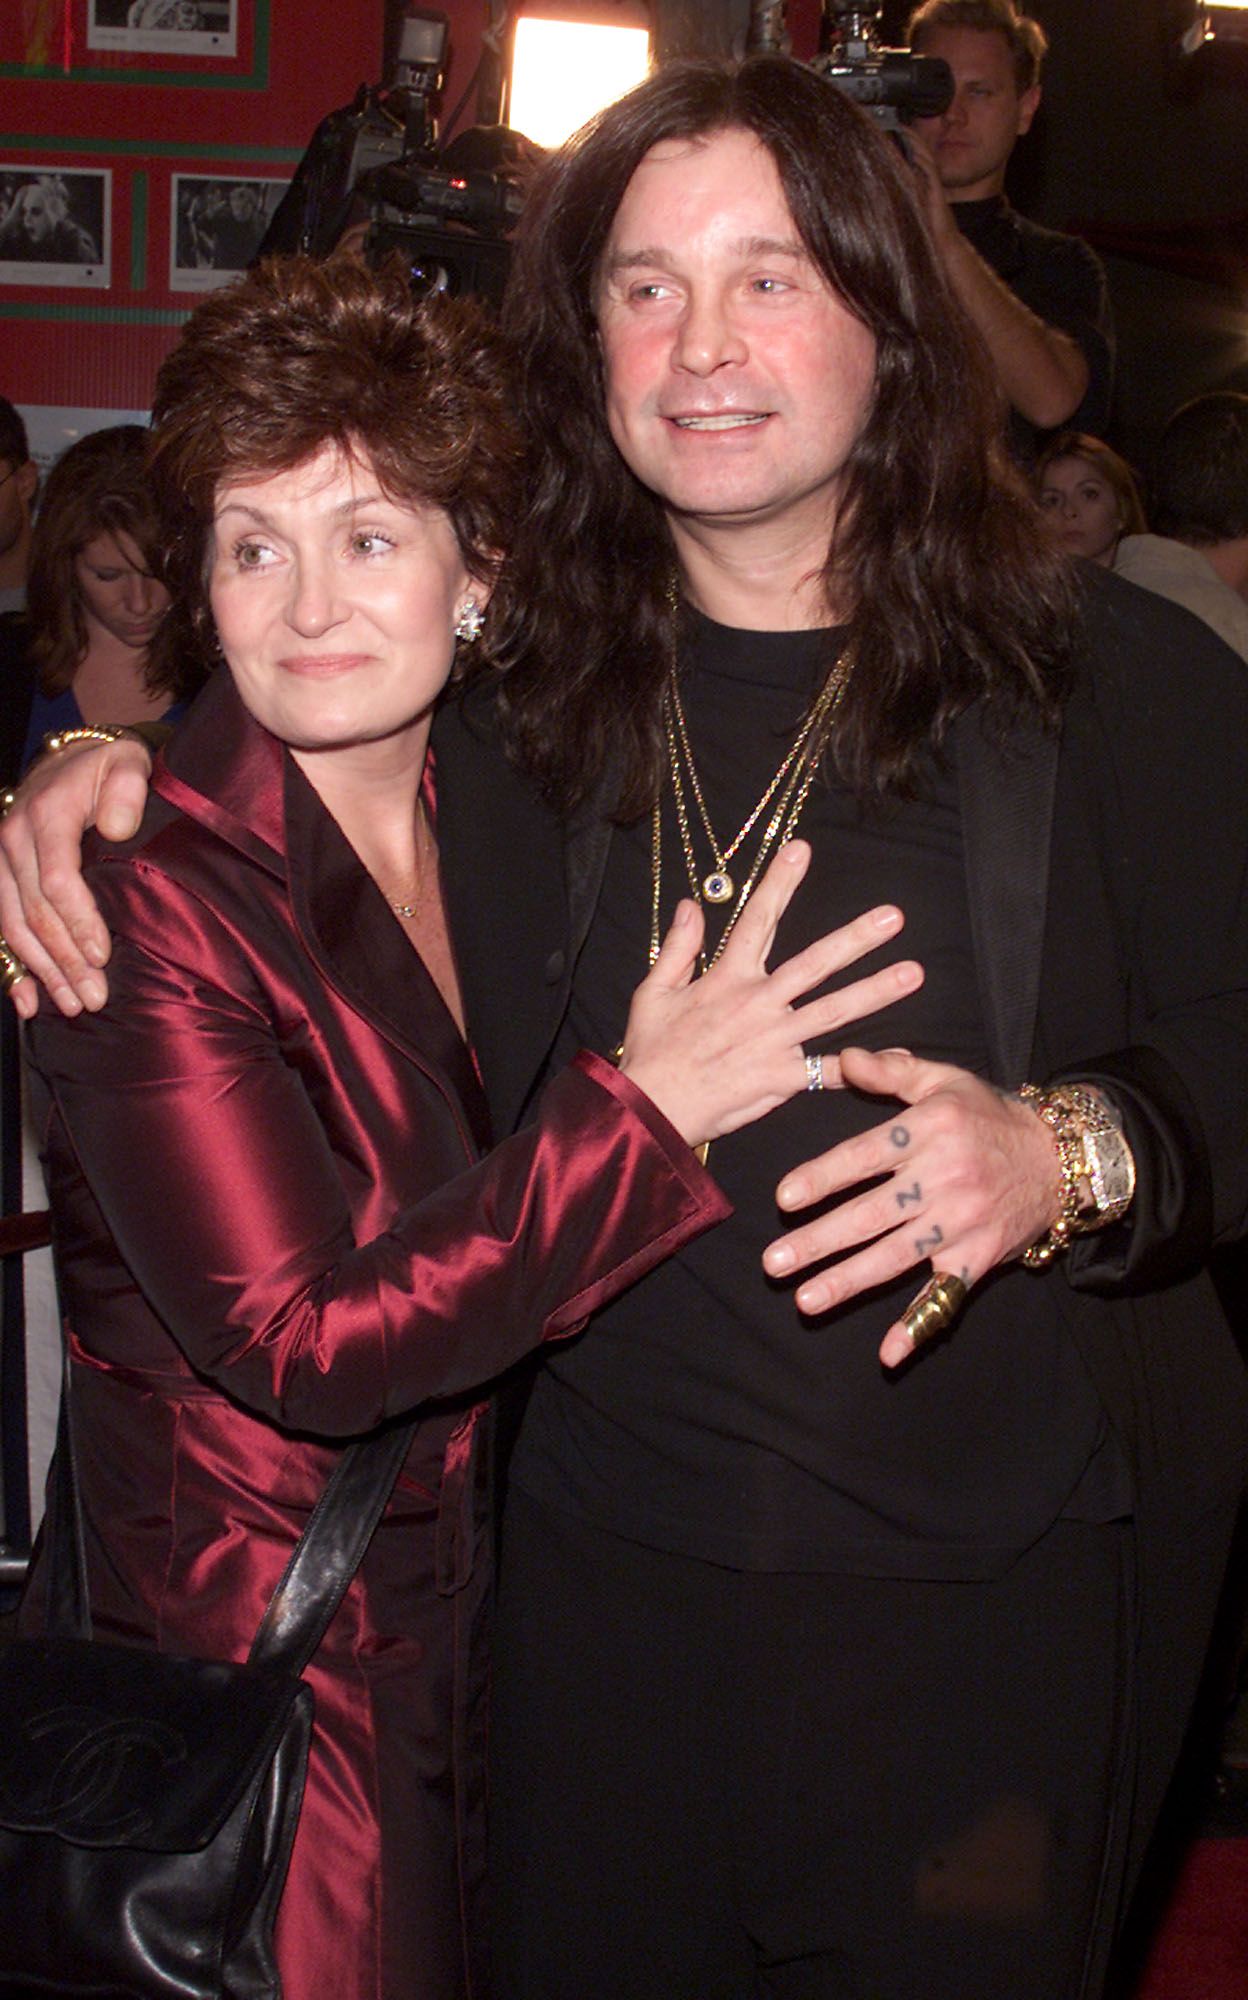 Sharon and Ozzy Osbourne at the premiere of "Little Nicky" in Los Angeles, California on November 2, 2000 | Photo: Kevin Winter/ImageDirect/Getty Images